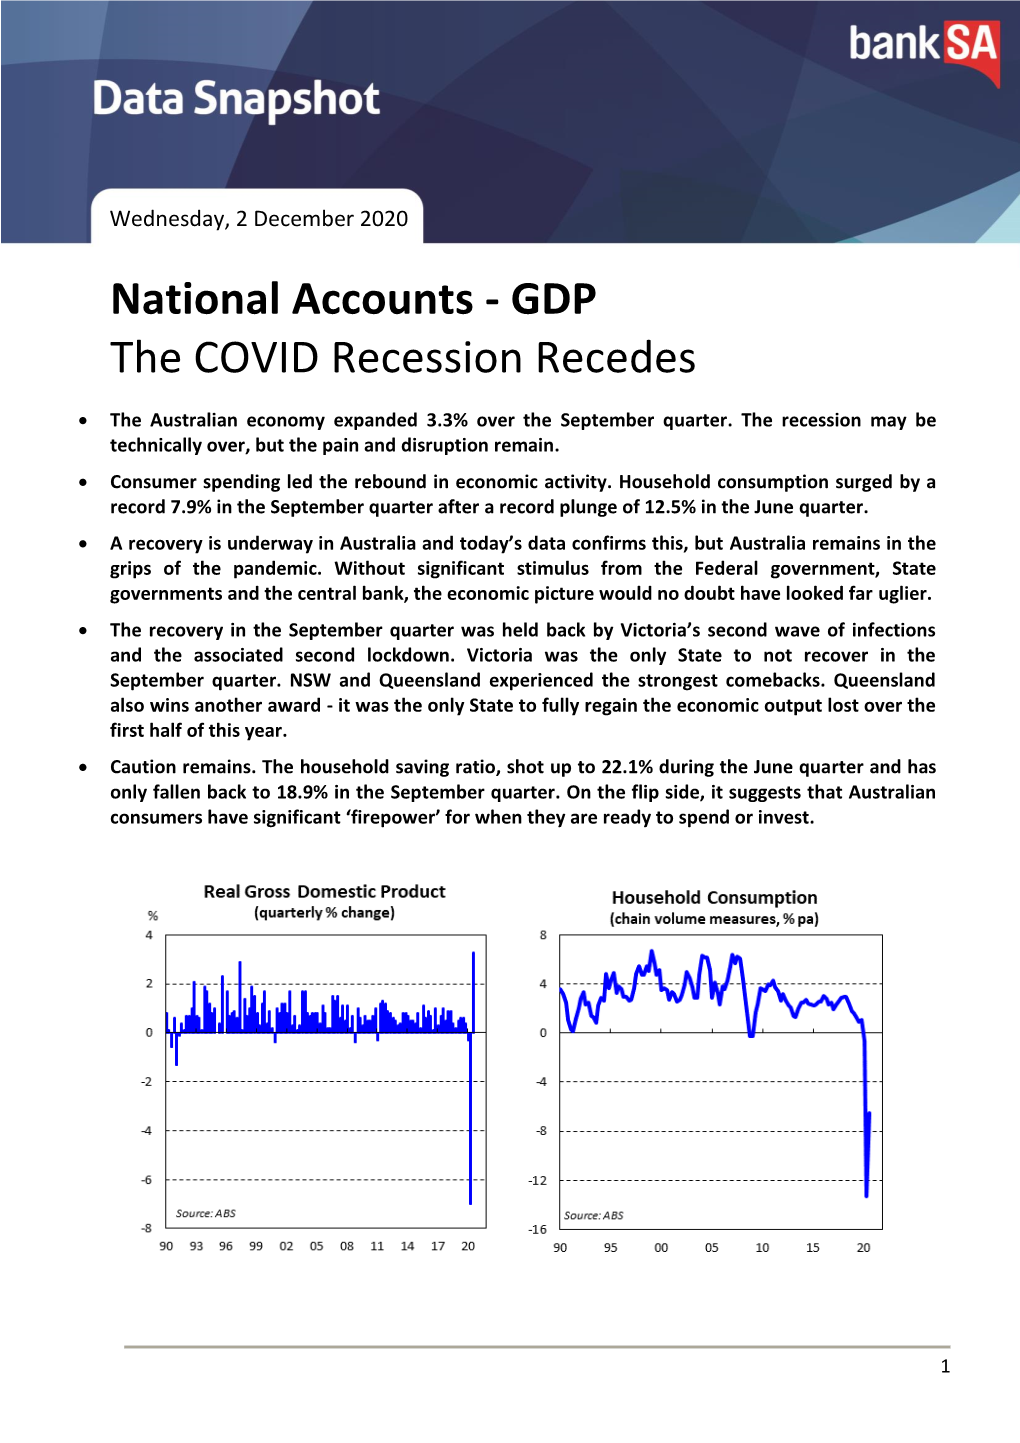 National Accounts - GDP the COVID Recession Recedes